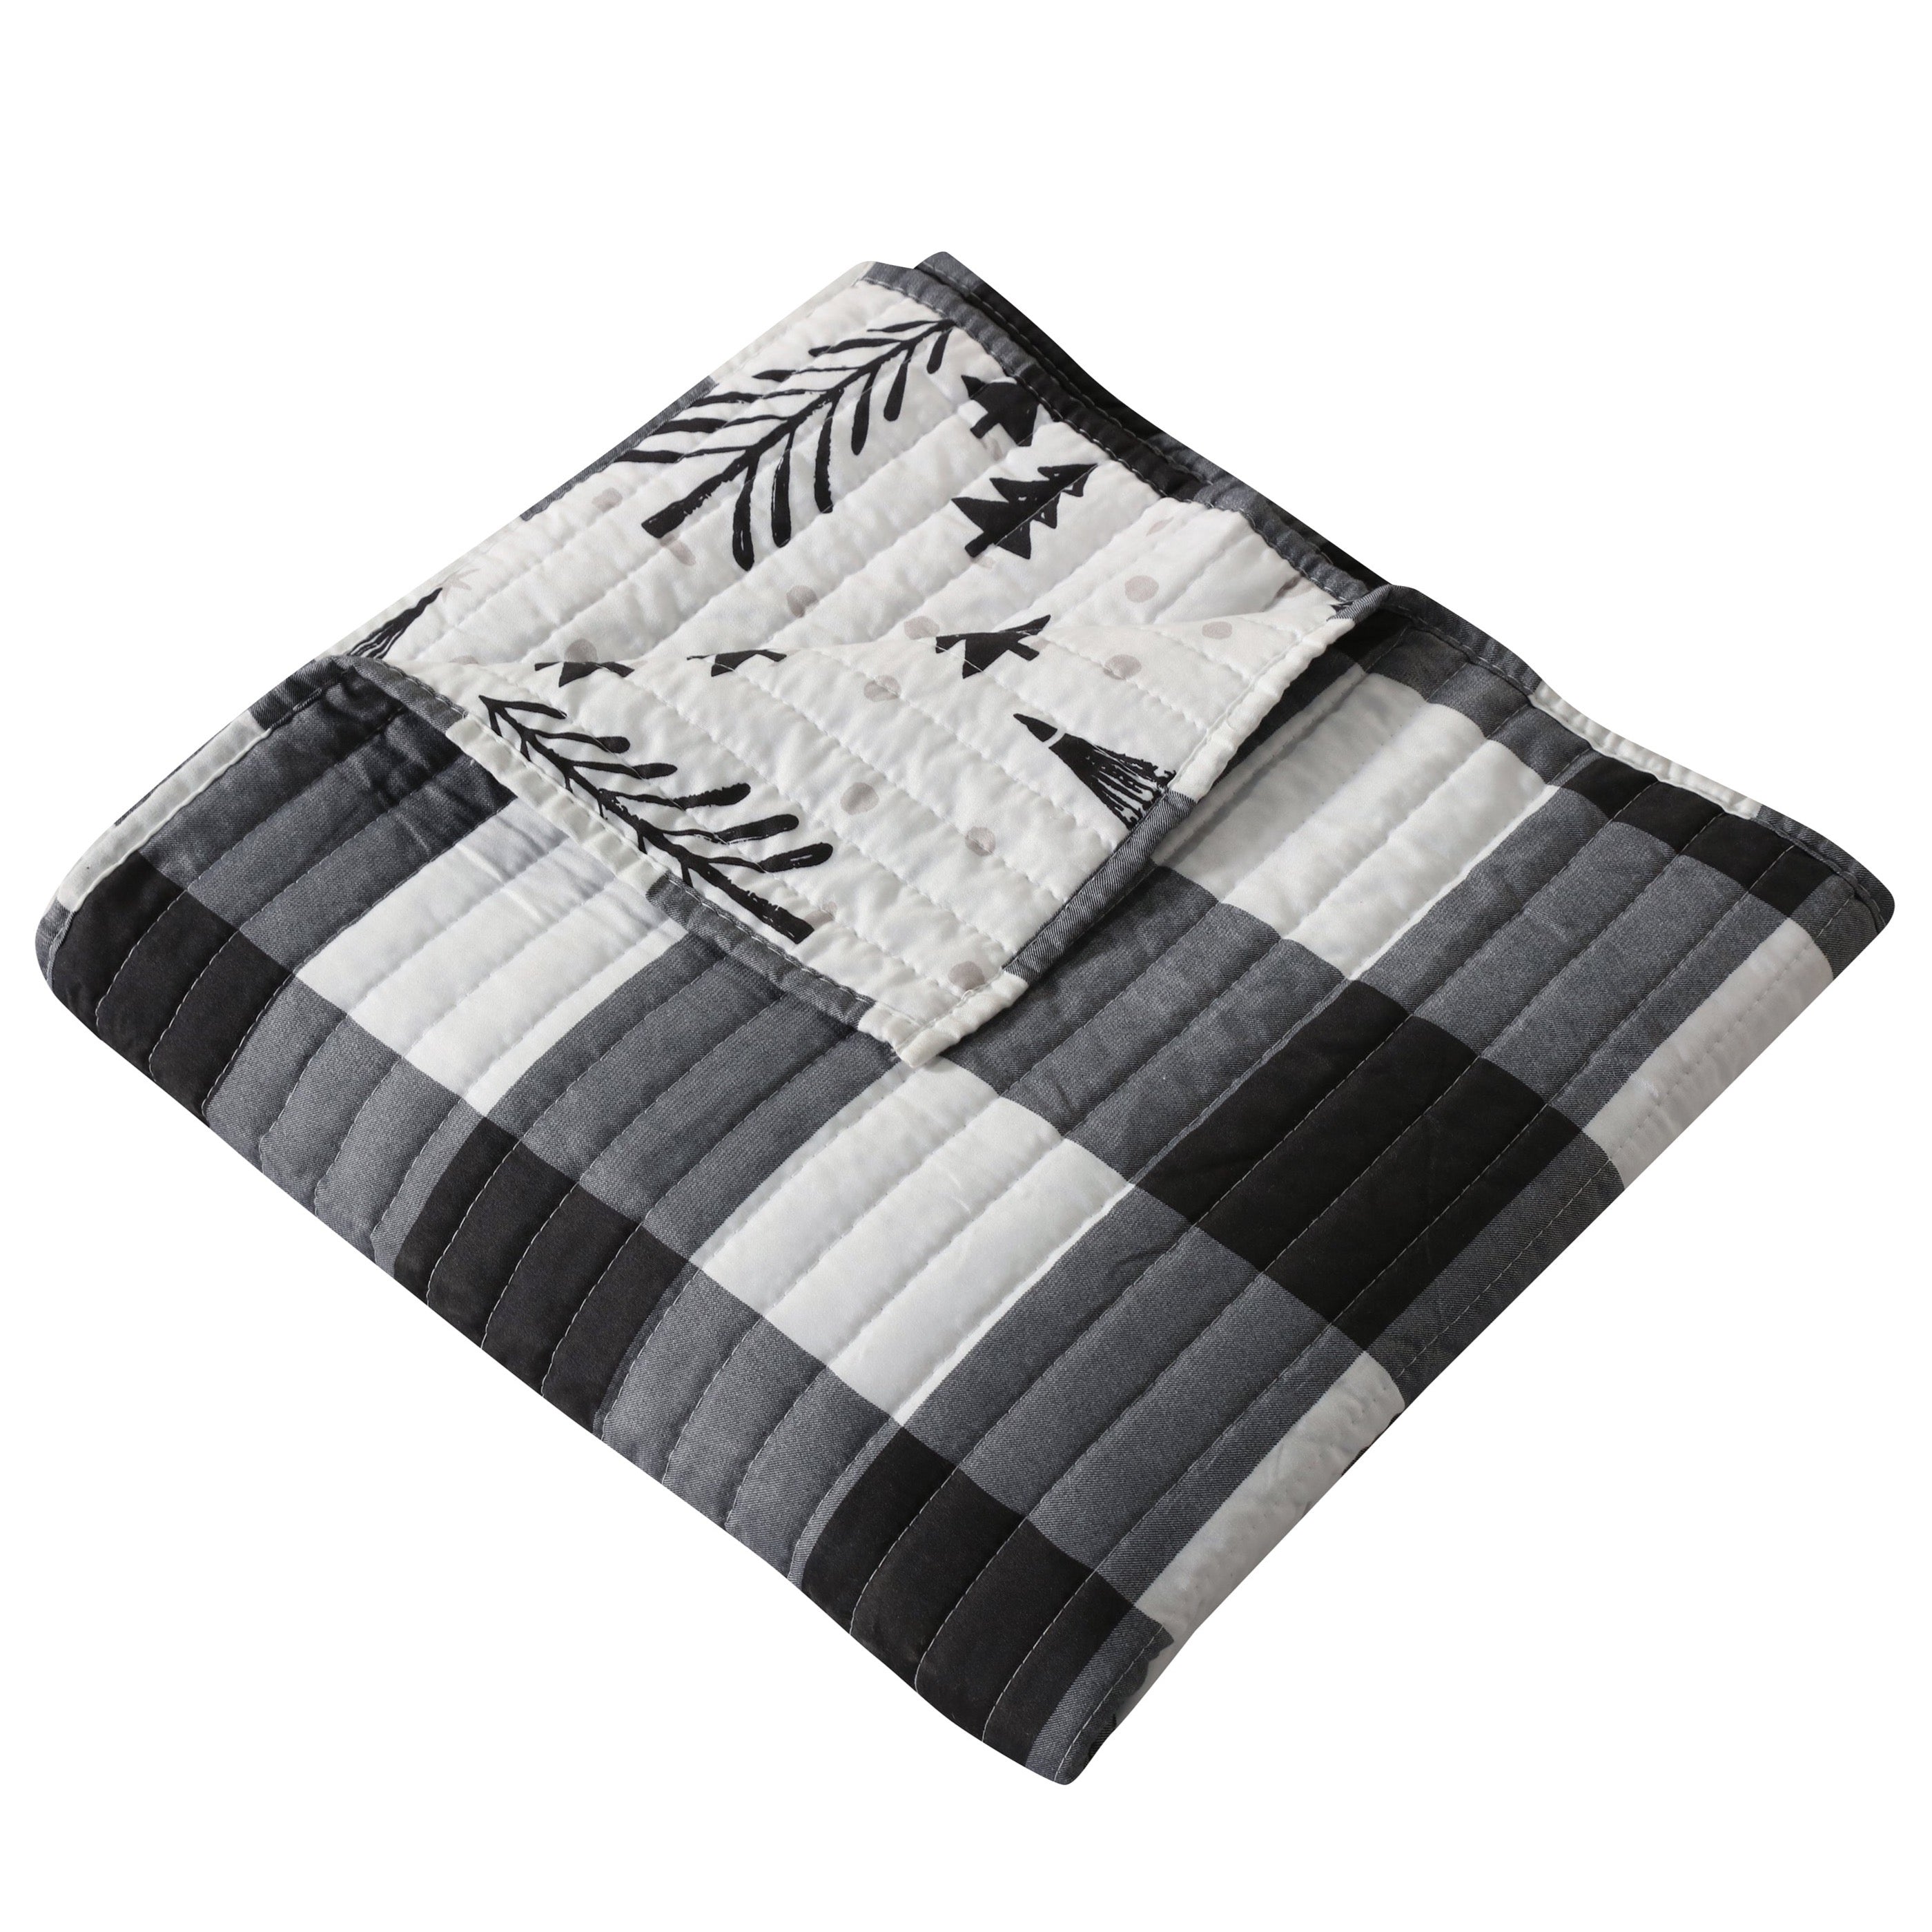 Northern Star Quilted Throw